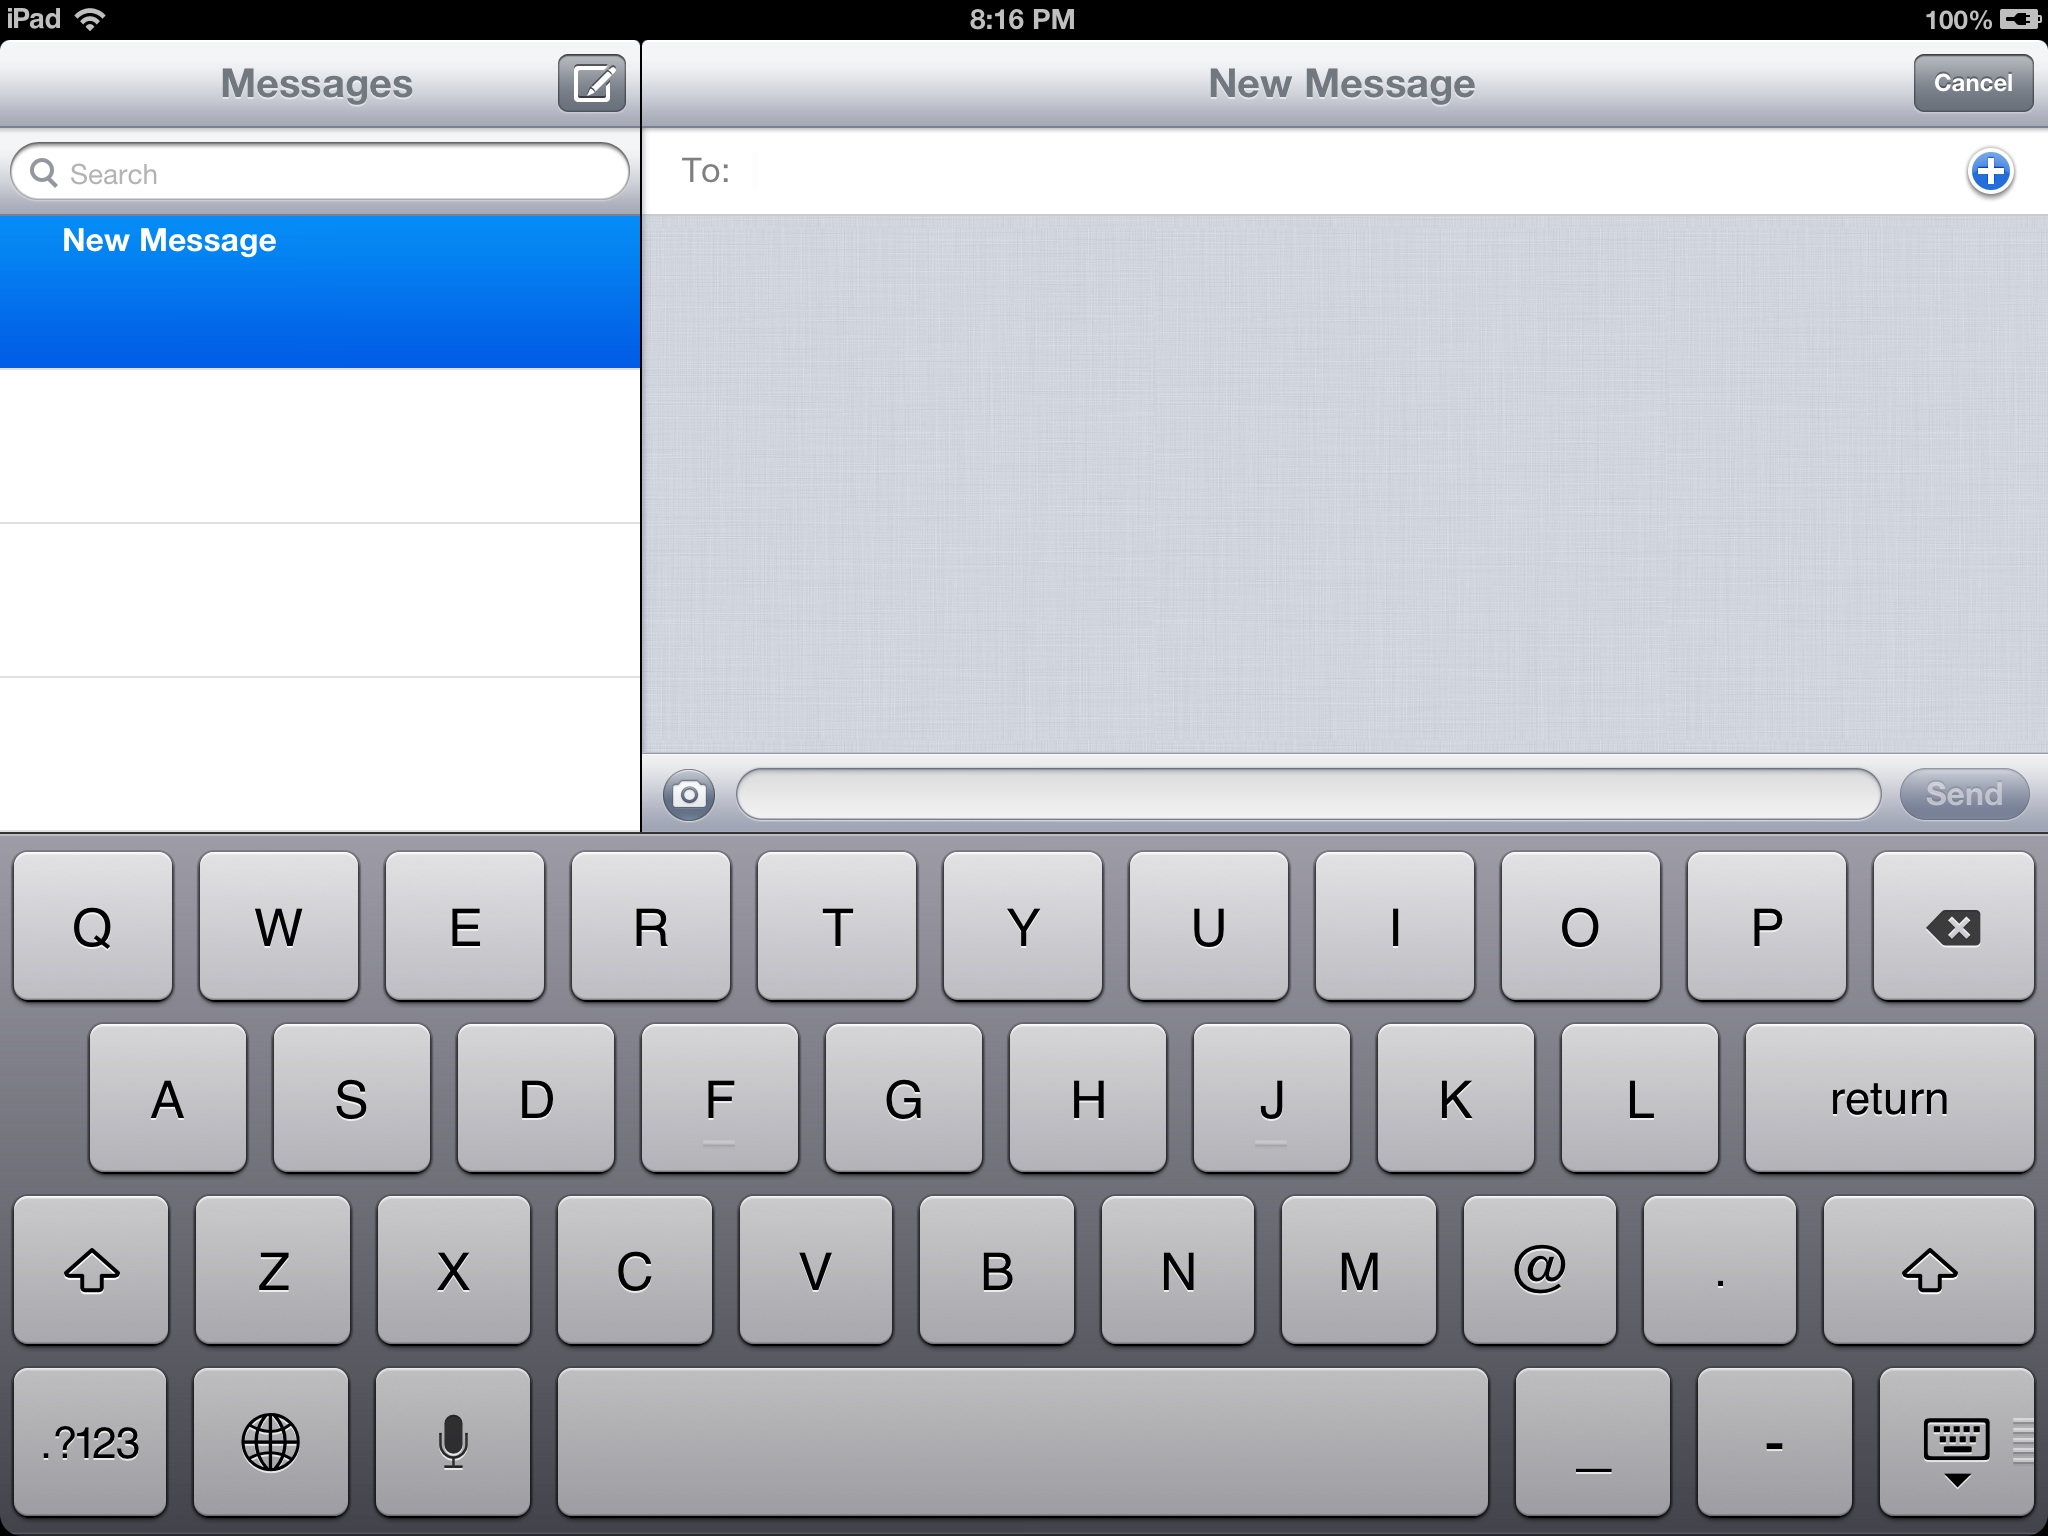 Messages search. IOS 5 messages. IMESSAGE.